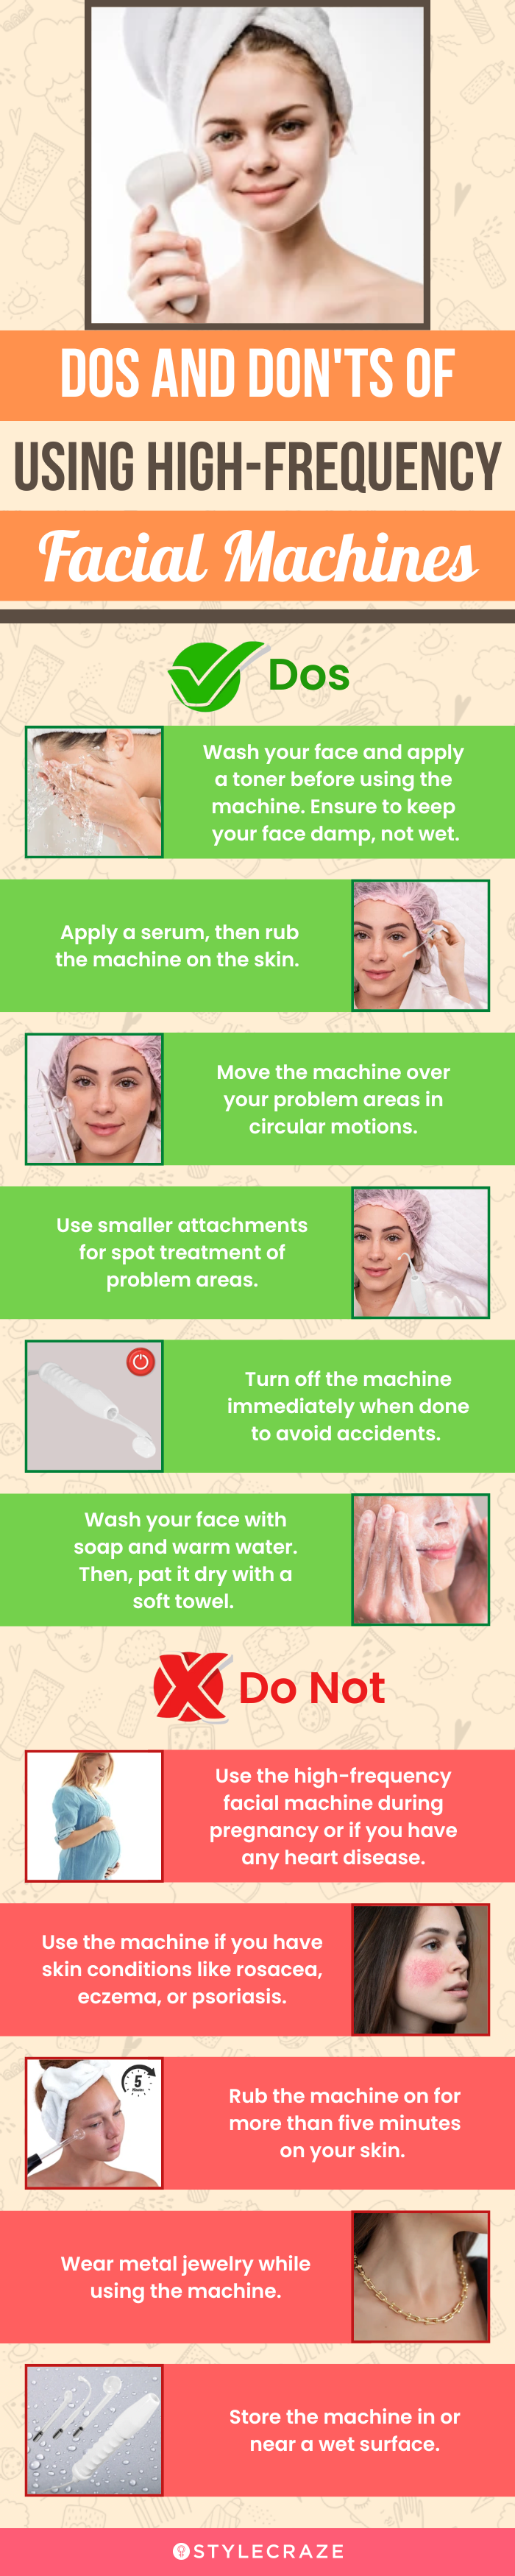 DOs and DON’Ts Of Using High-Frequency Facial Machines (infographic)